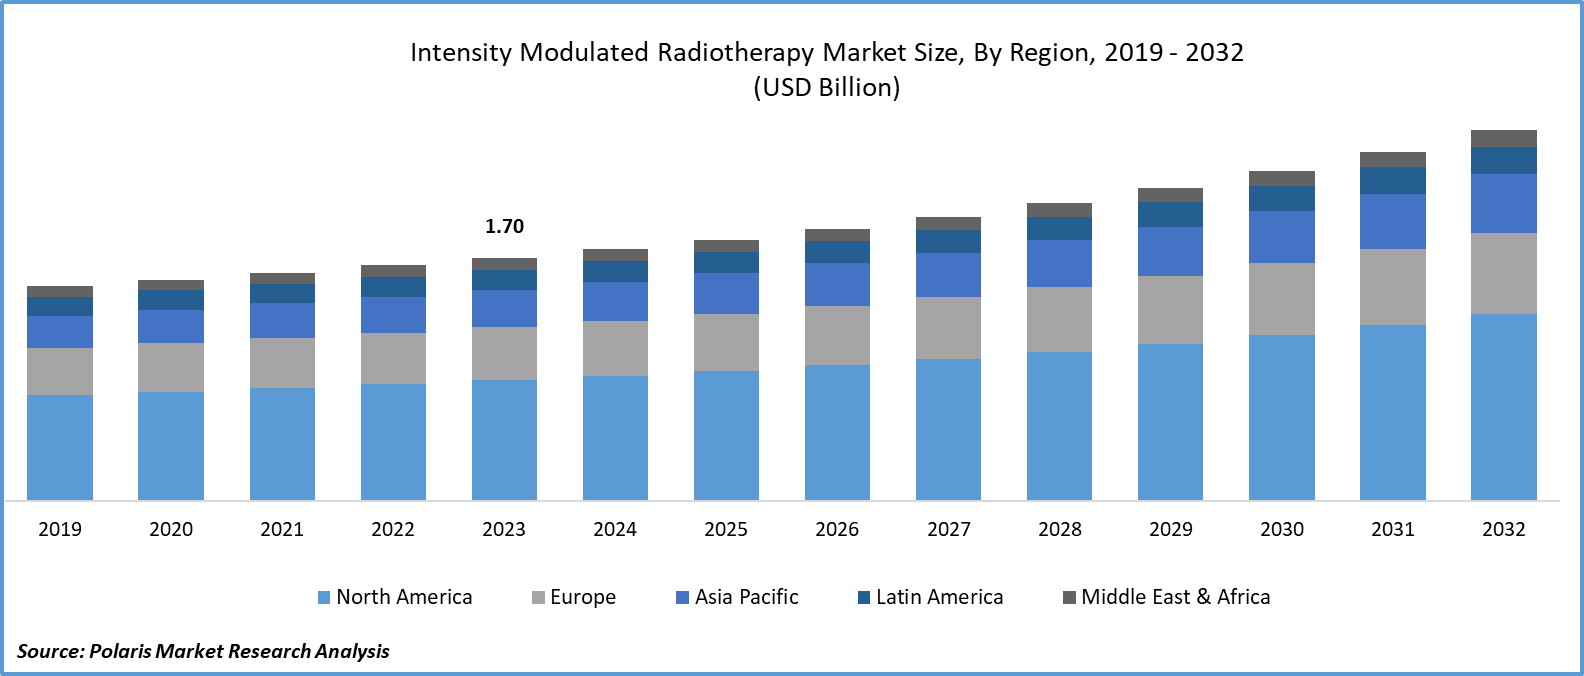 Intensity Modulated Radiotherapy Market Size